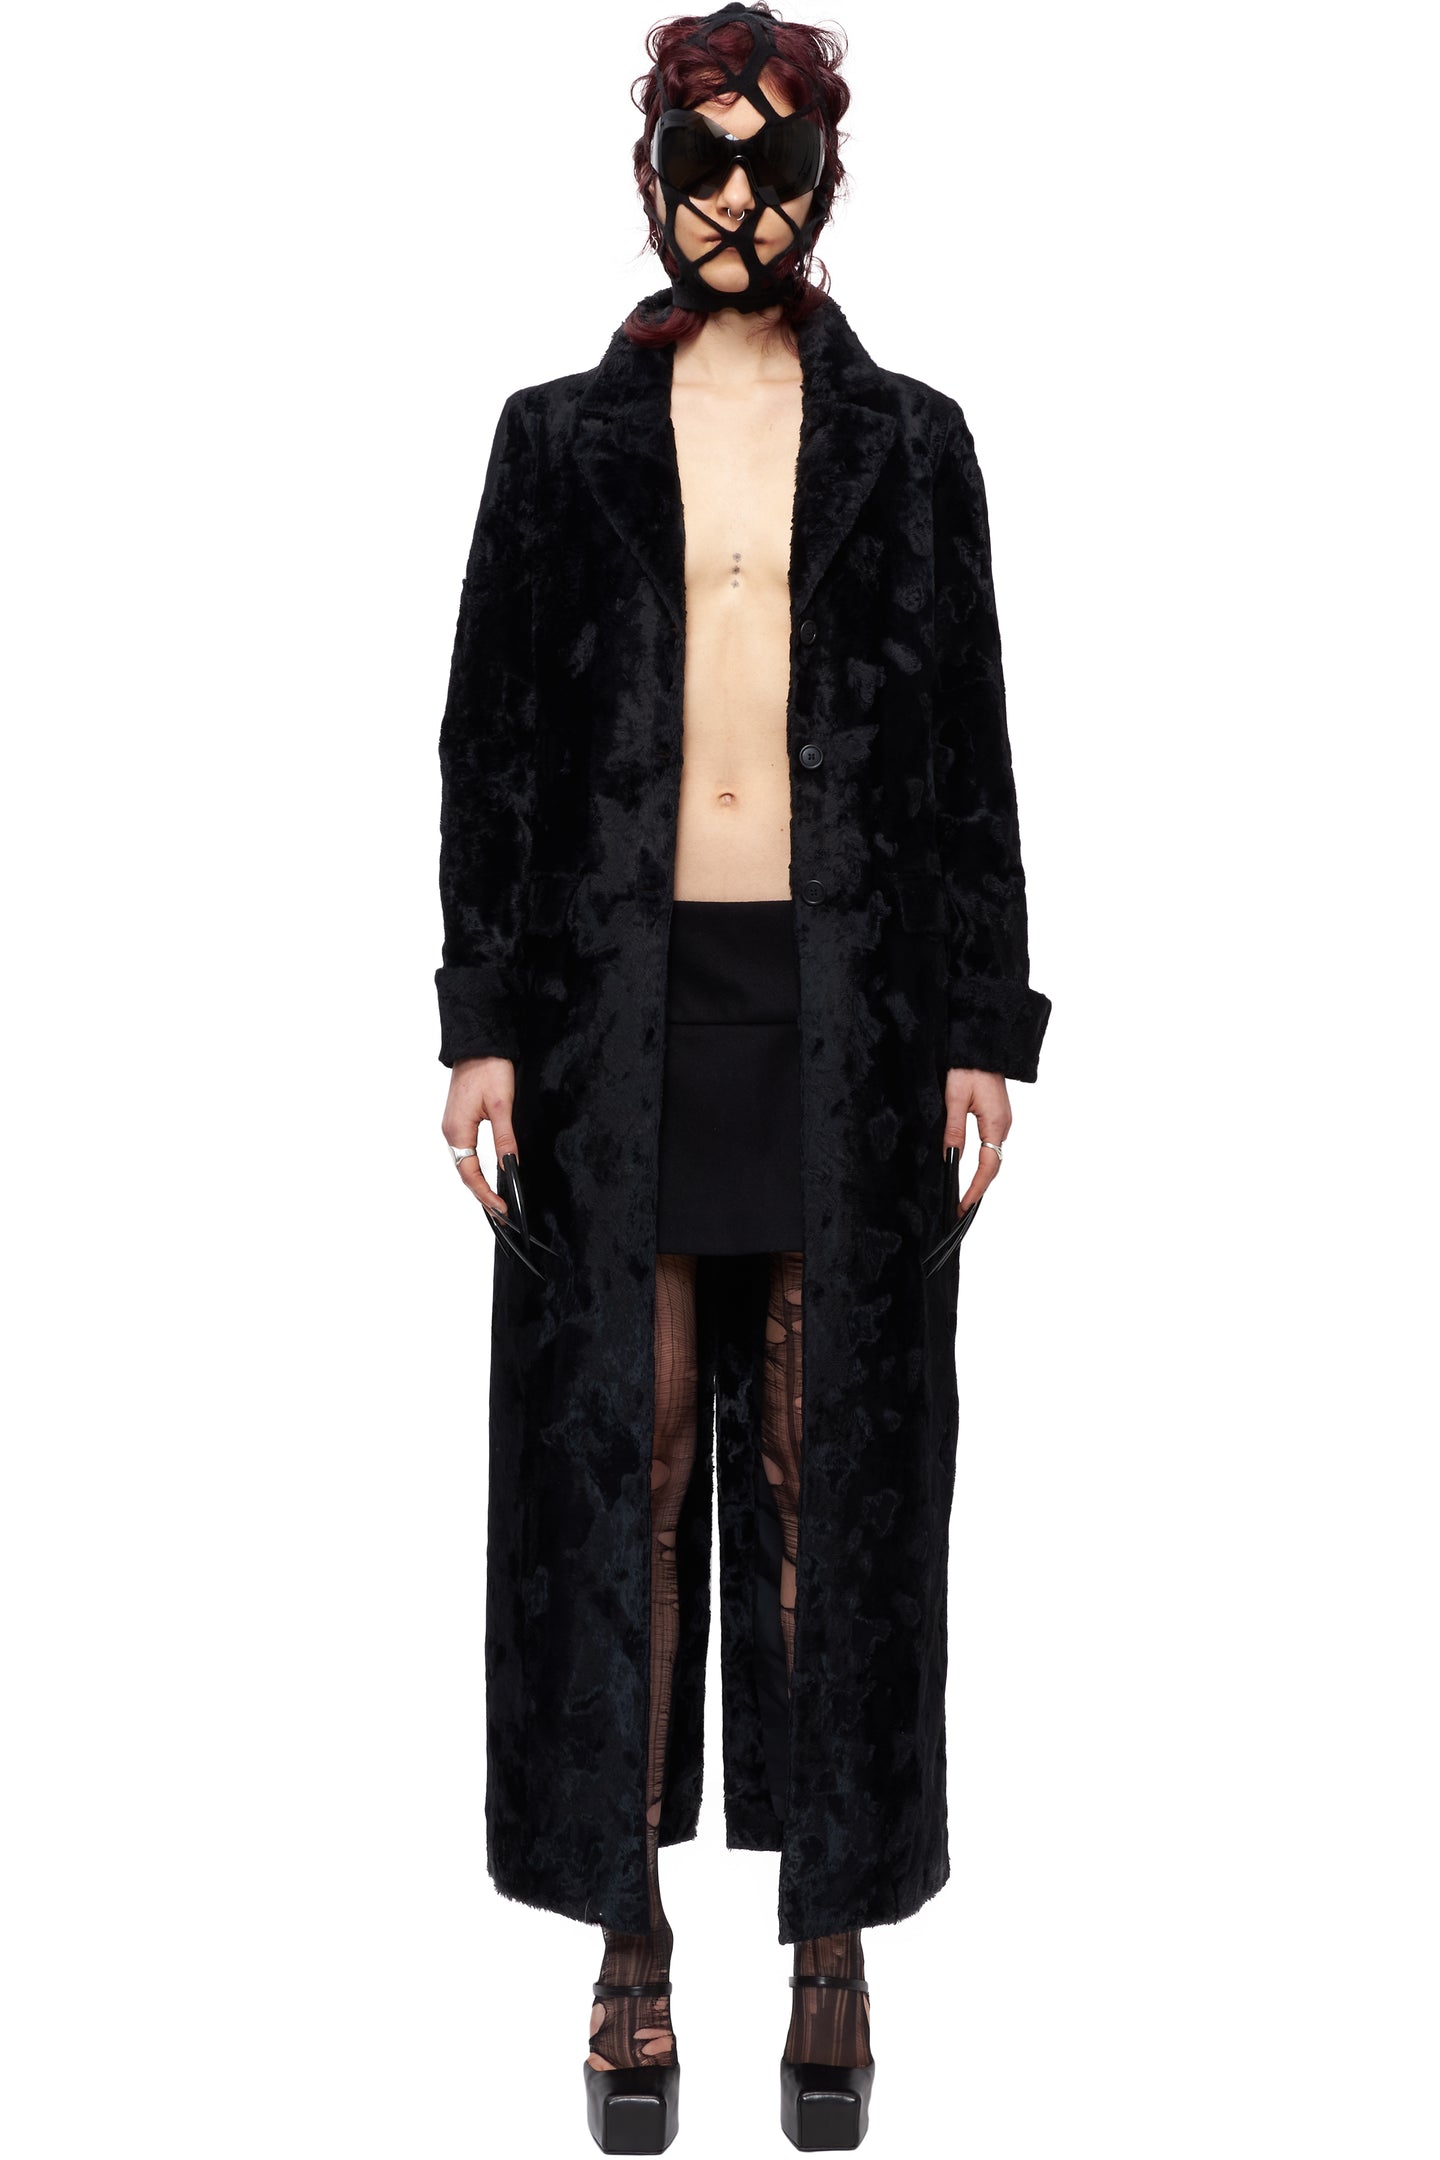 JEAN COLONNA FW98 LONG TAILORED COAT